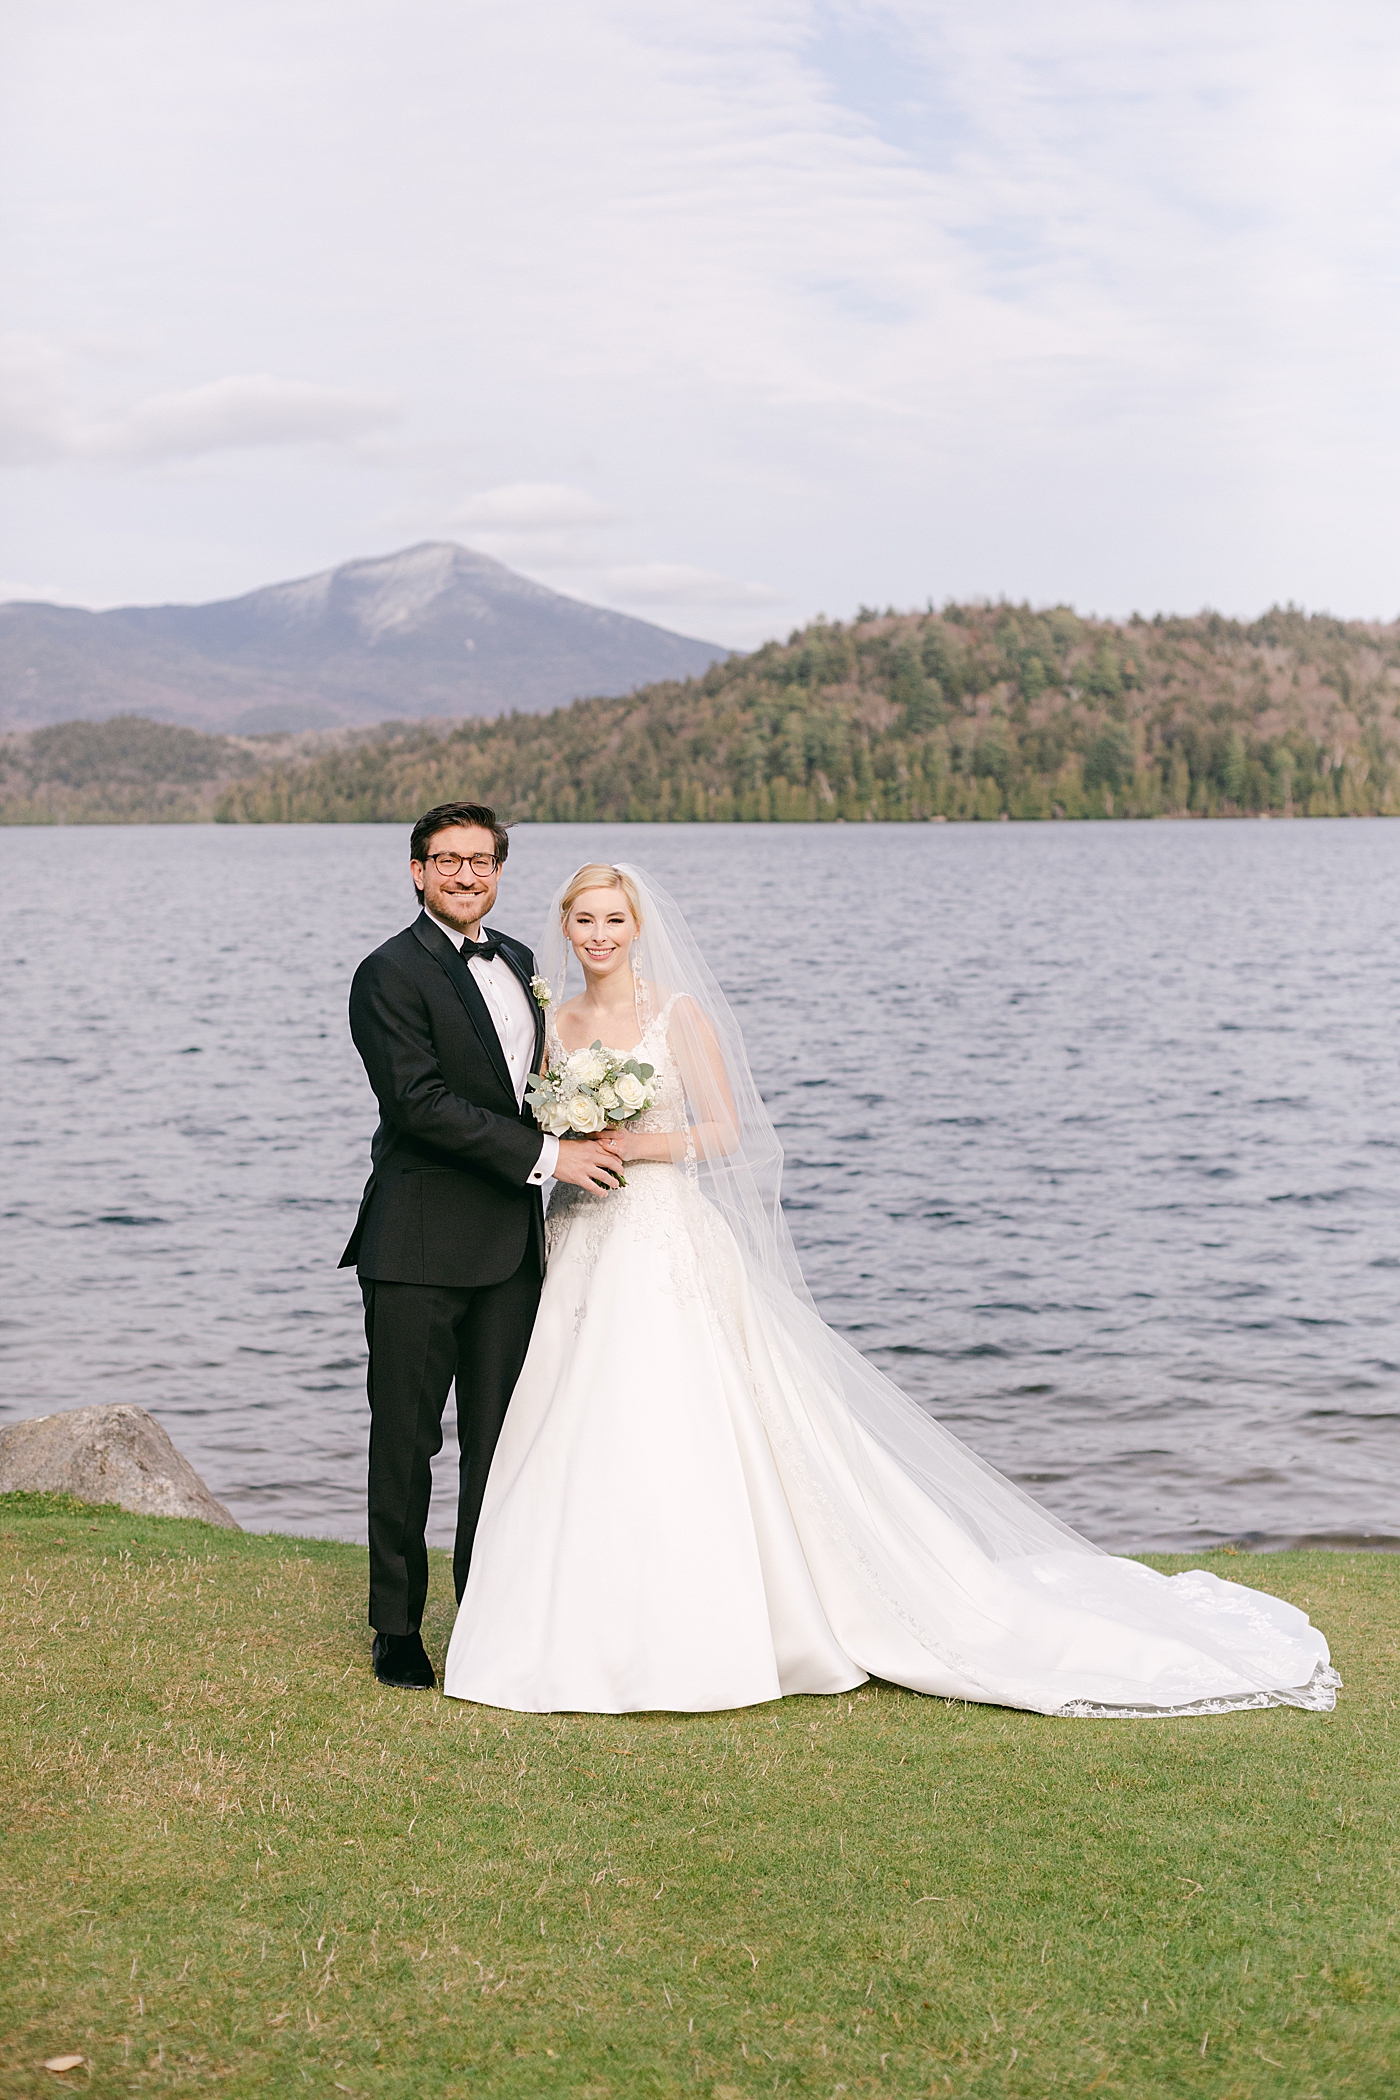 Bride and groom portraits near Lake Placid | Image by Hope Helmuth Photography